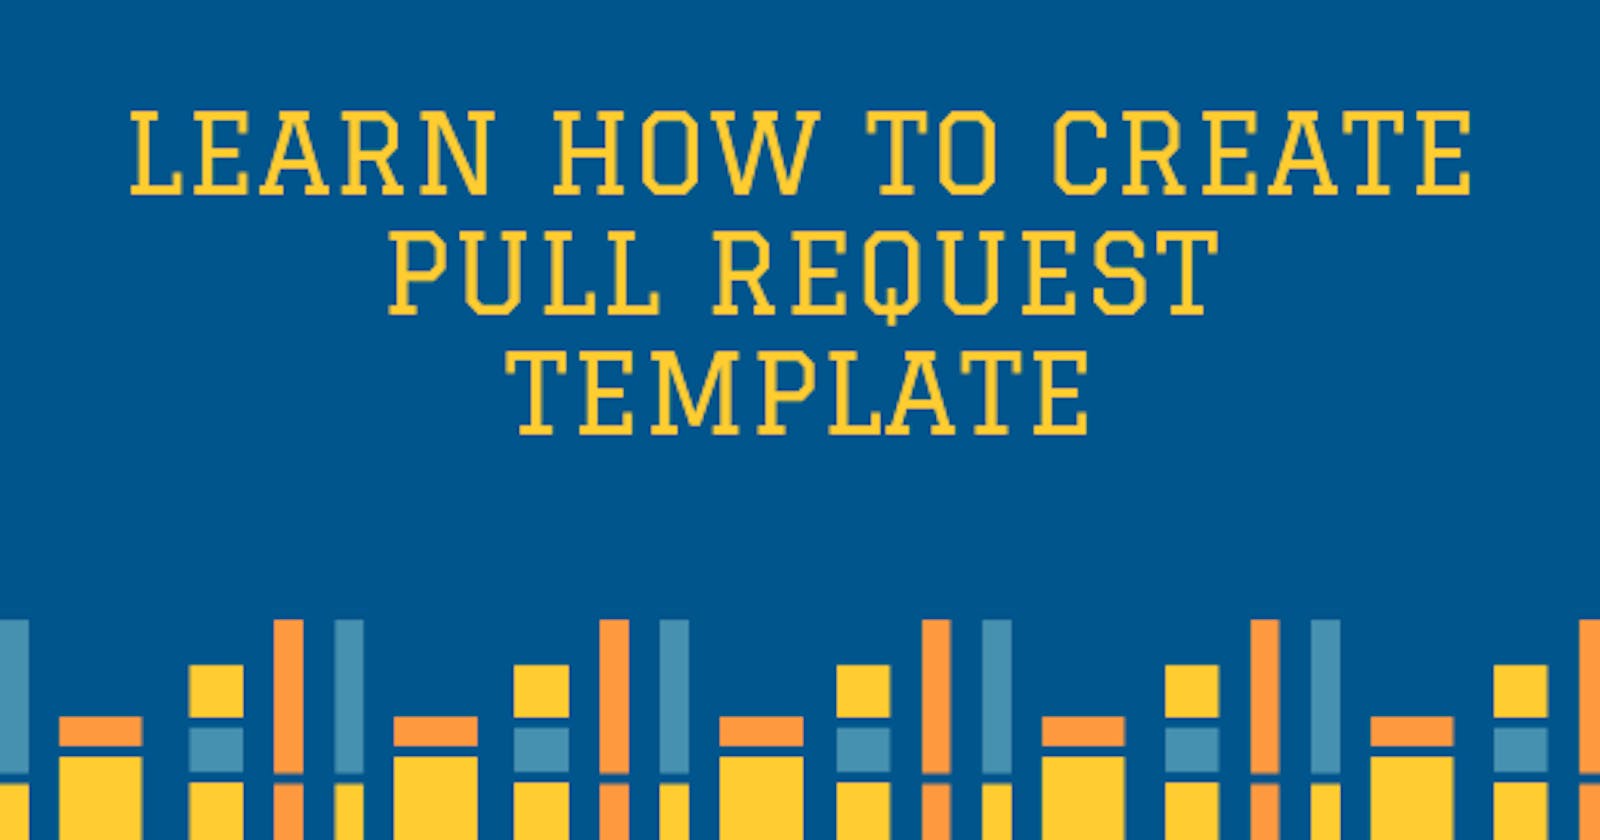 Let's Create Pull Request Template!